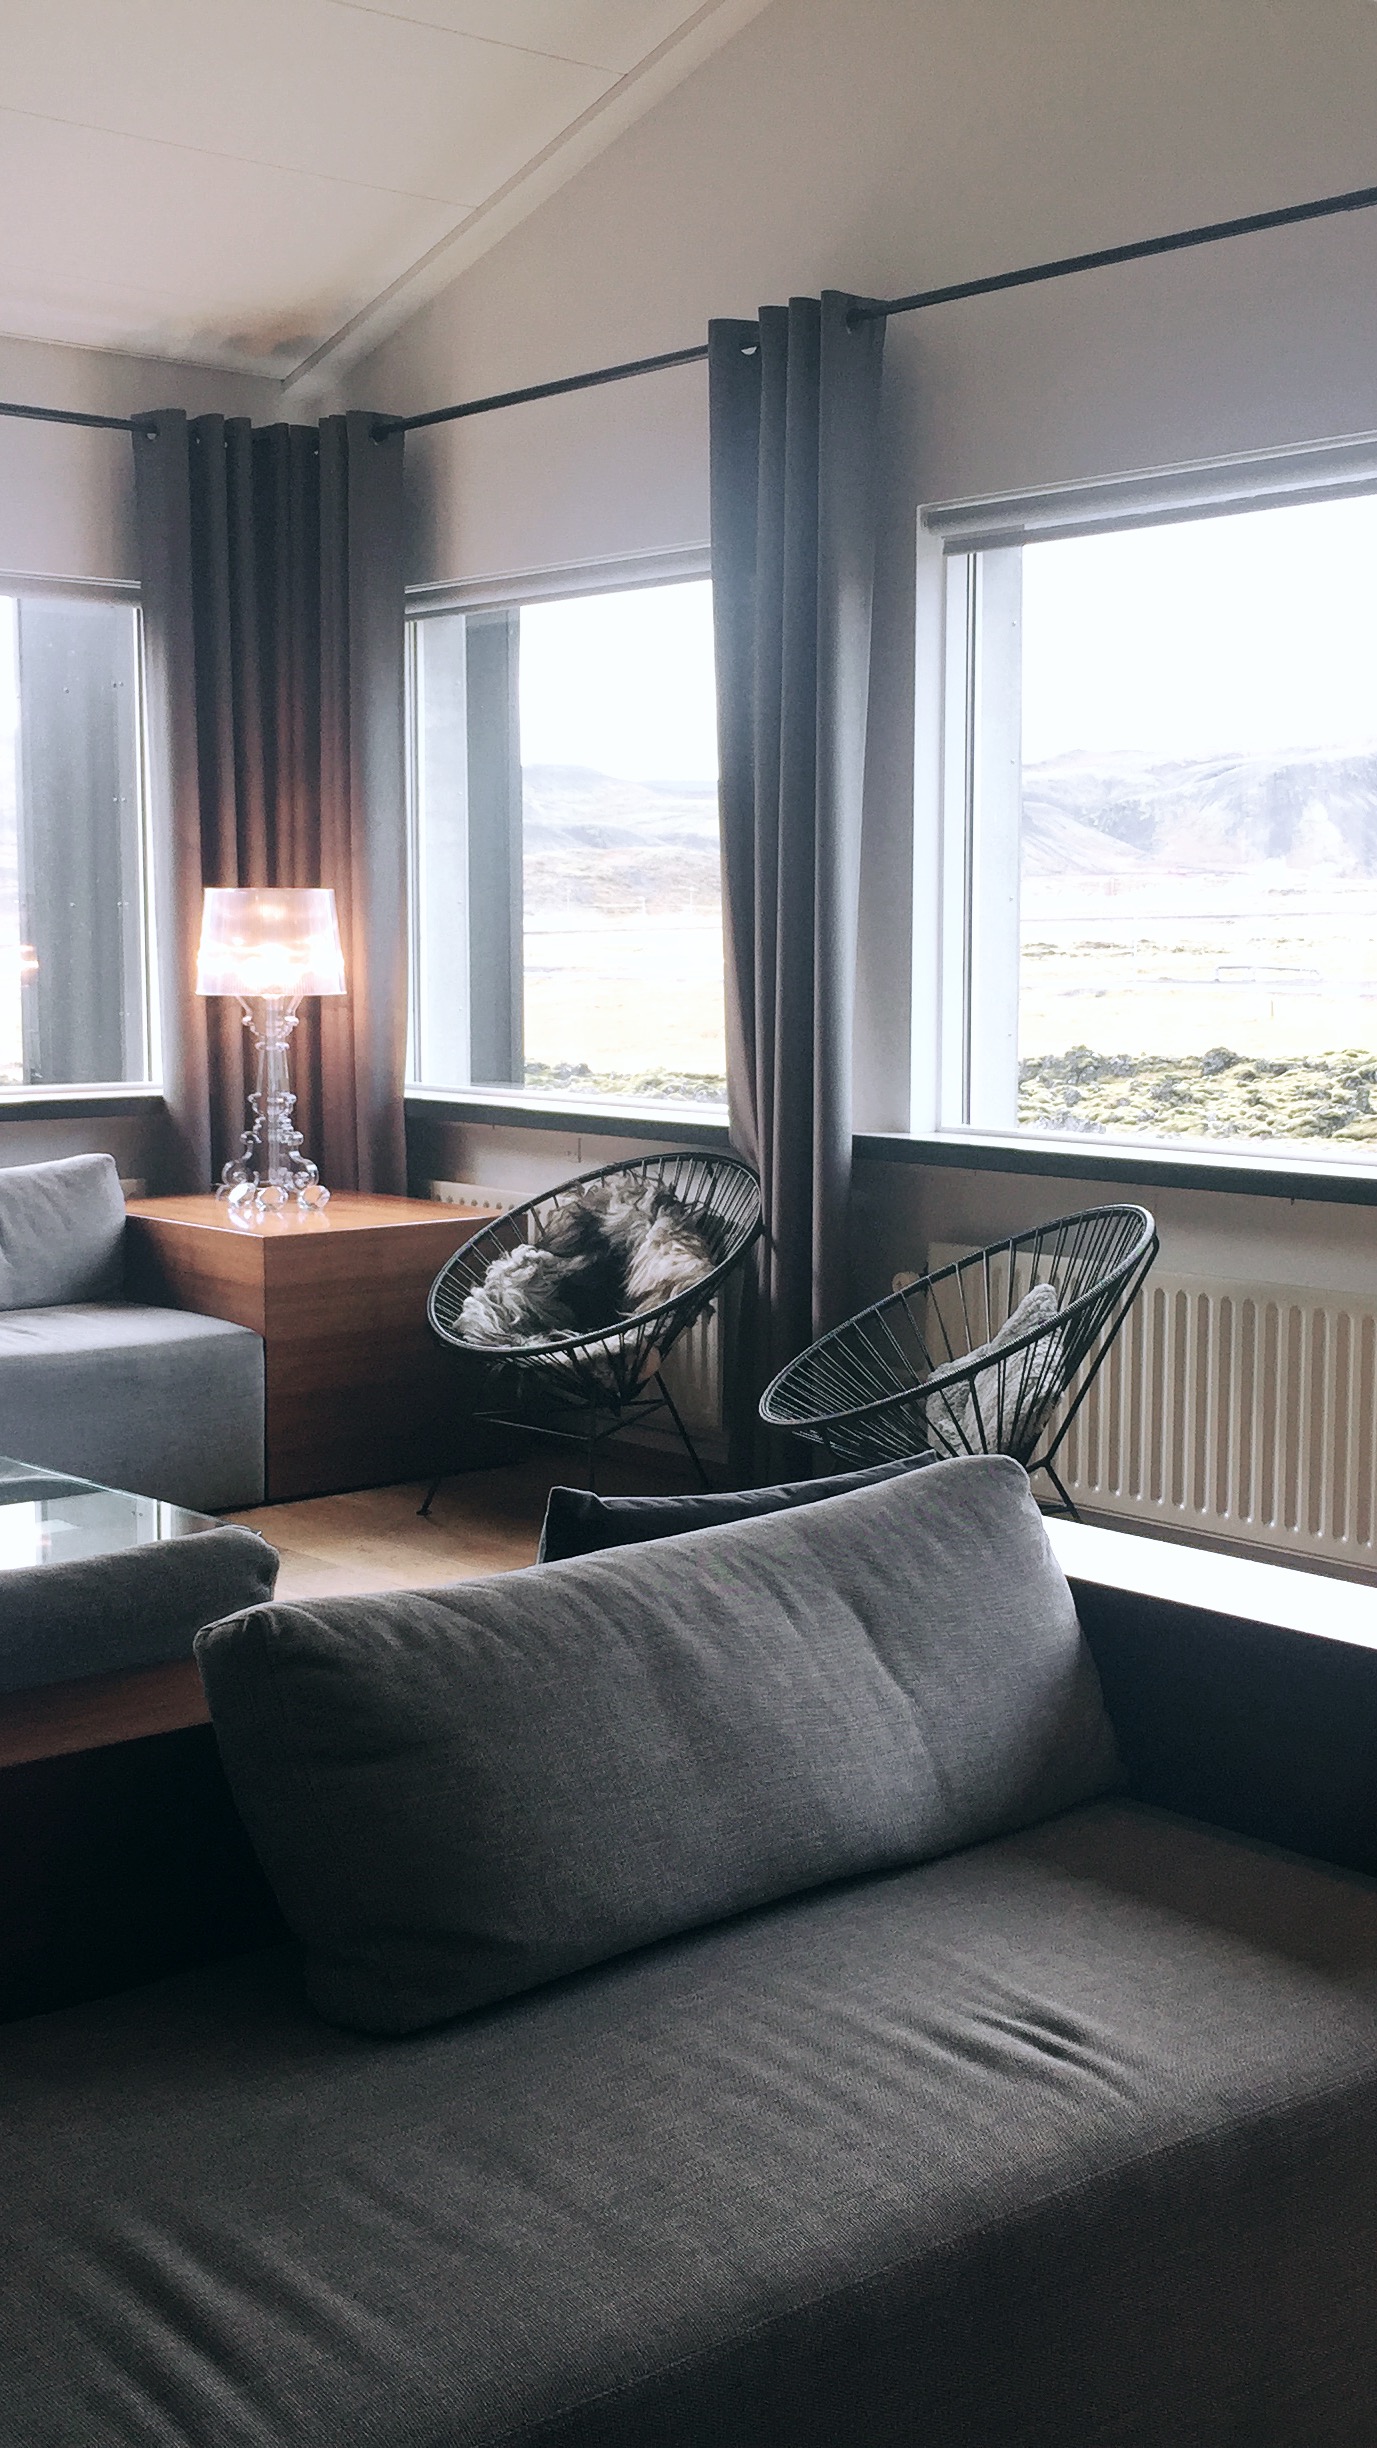 ION Adventure Hotel - Iceland - top five iceland travel tips